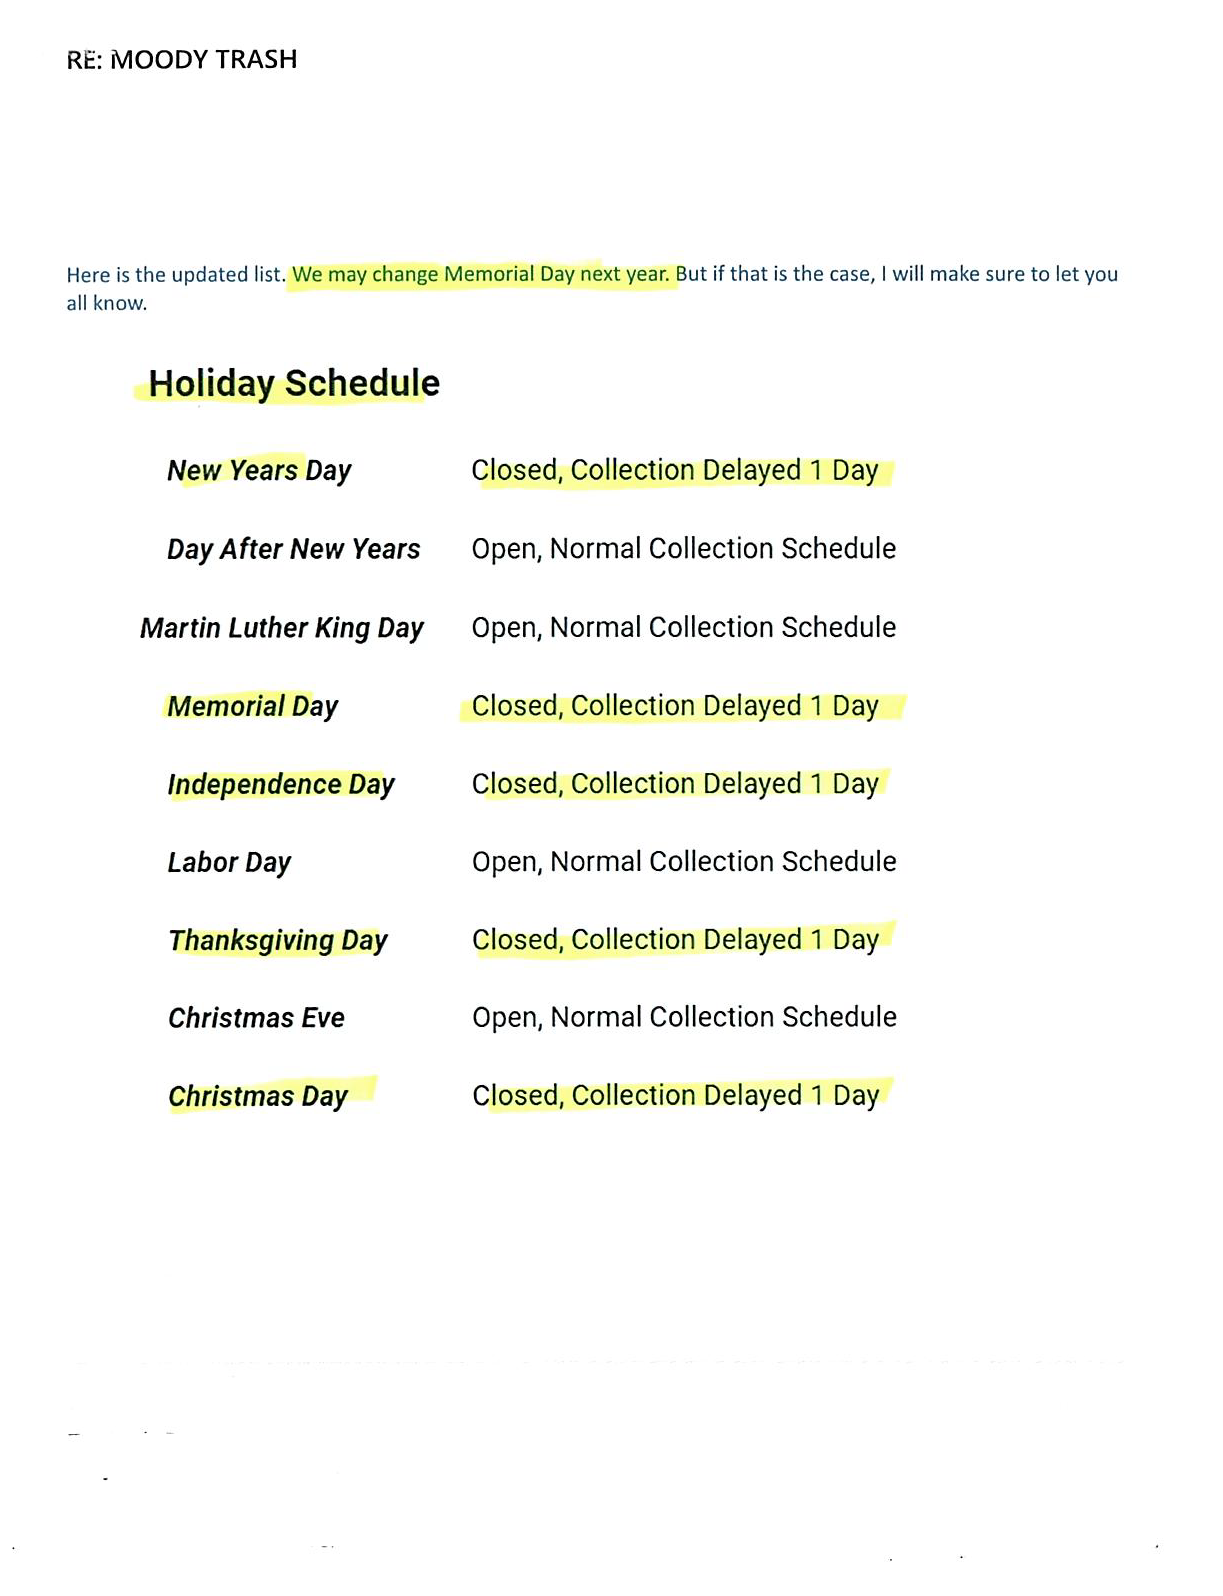 WASTE CONNECTIONS HOLIDAY SCHEDULE FOR TRASH PICK/UP ALSO WHAT IS